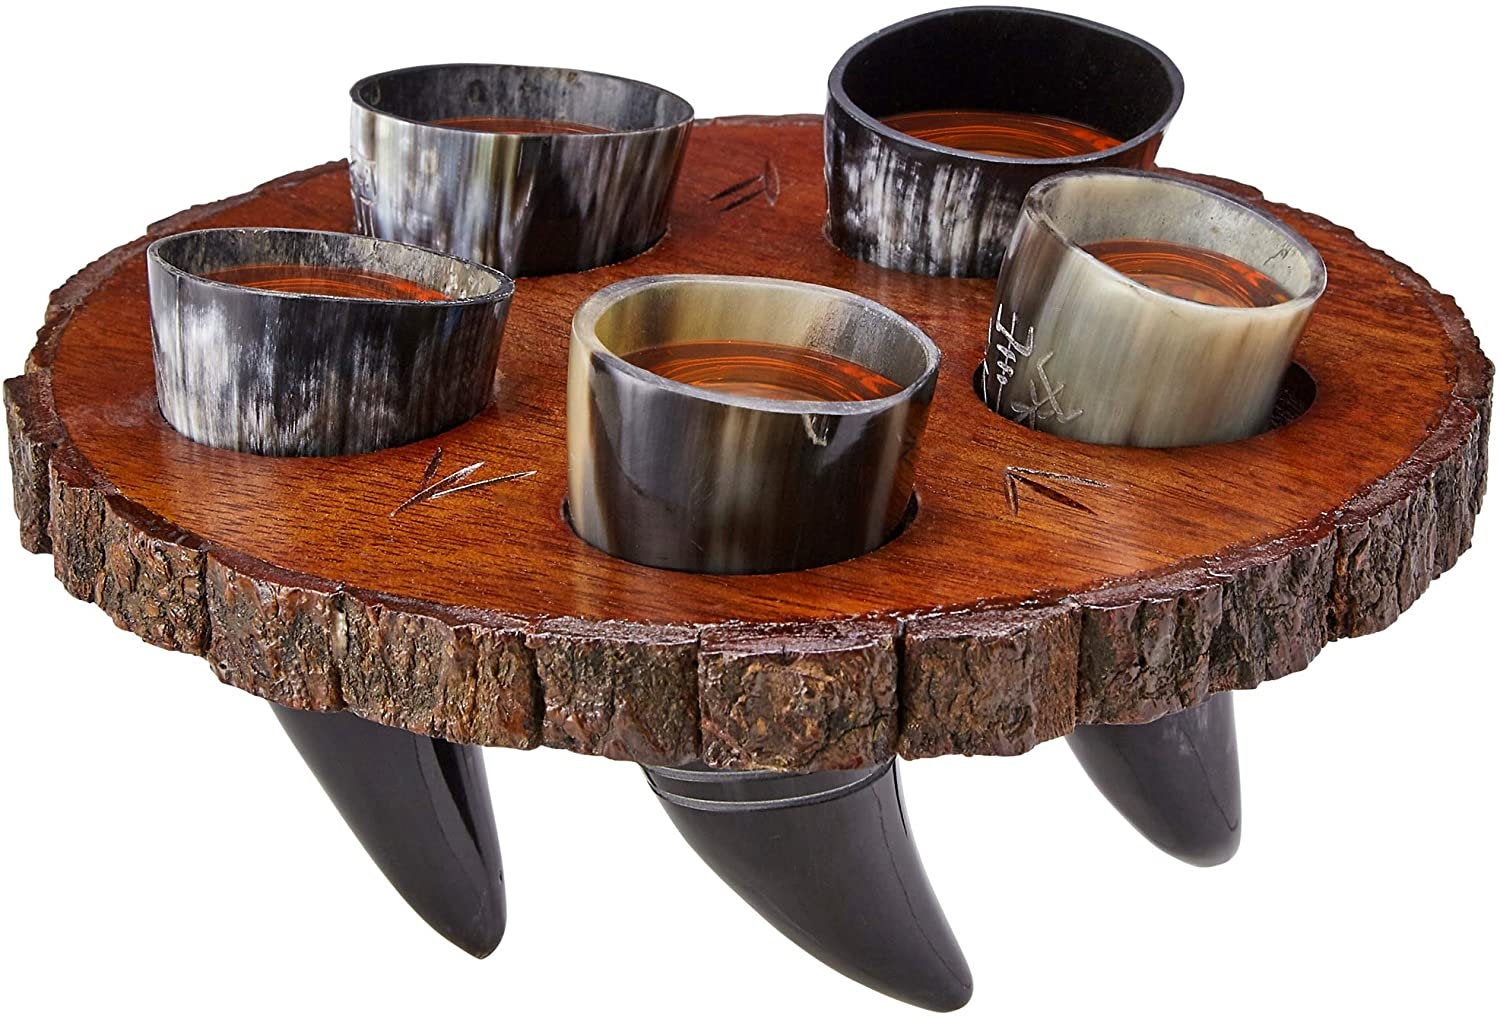 Viking Culture Viking Horn Drinking Cup Shot Glasses with Vintage Axe Bottle Opener, Coasters, and Rustic Wood Display Stand, Toasting Vessels for Party, Event, Bachelors